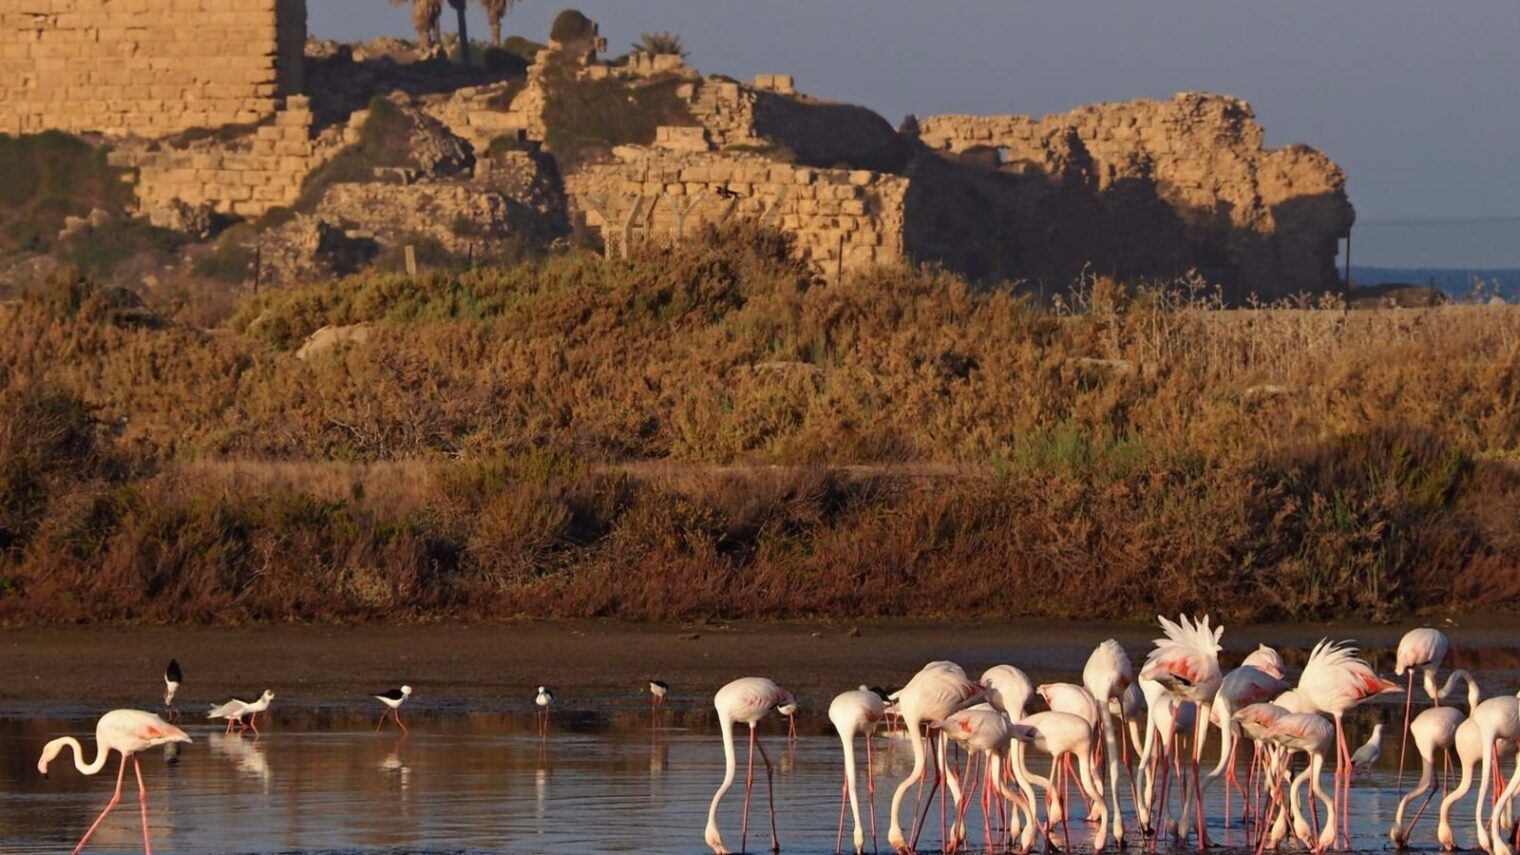 Because there are flamingos here. Flamingos in front of the ancient Atlit Fortress in northern Israel. Photo by Ilya Krivorok